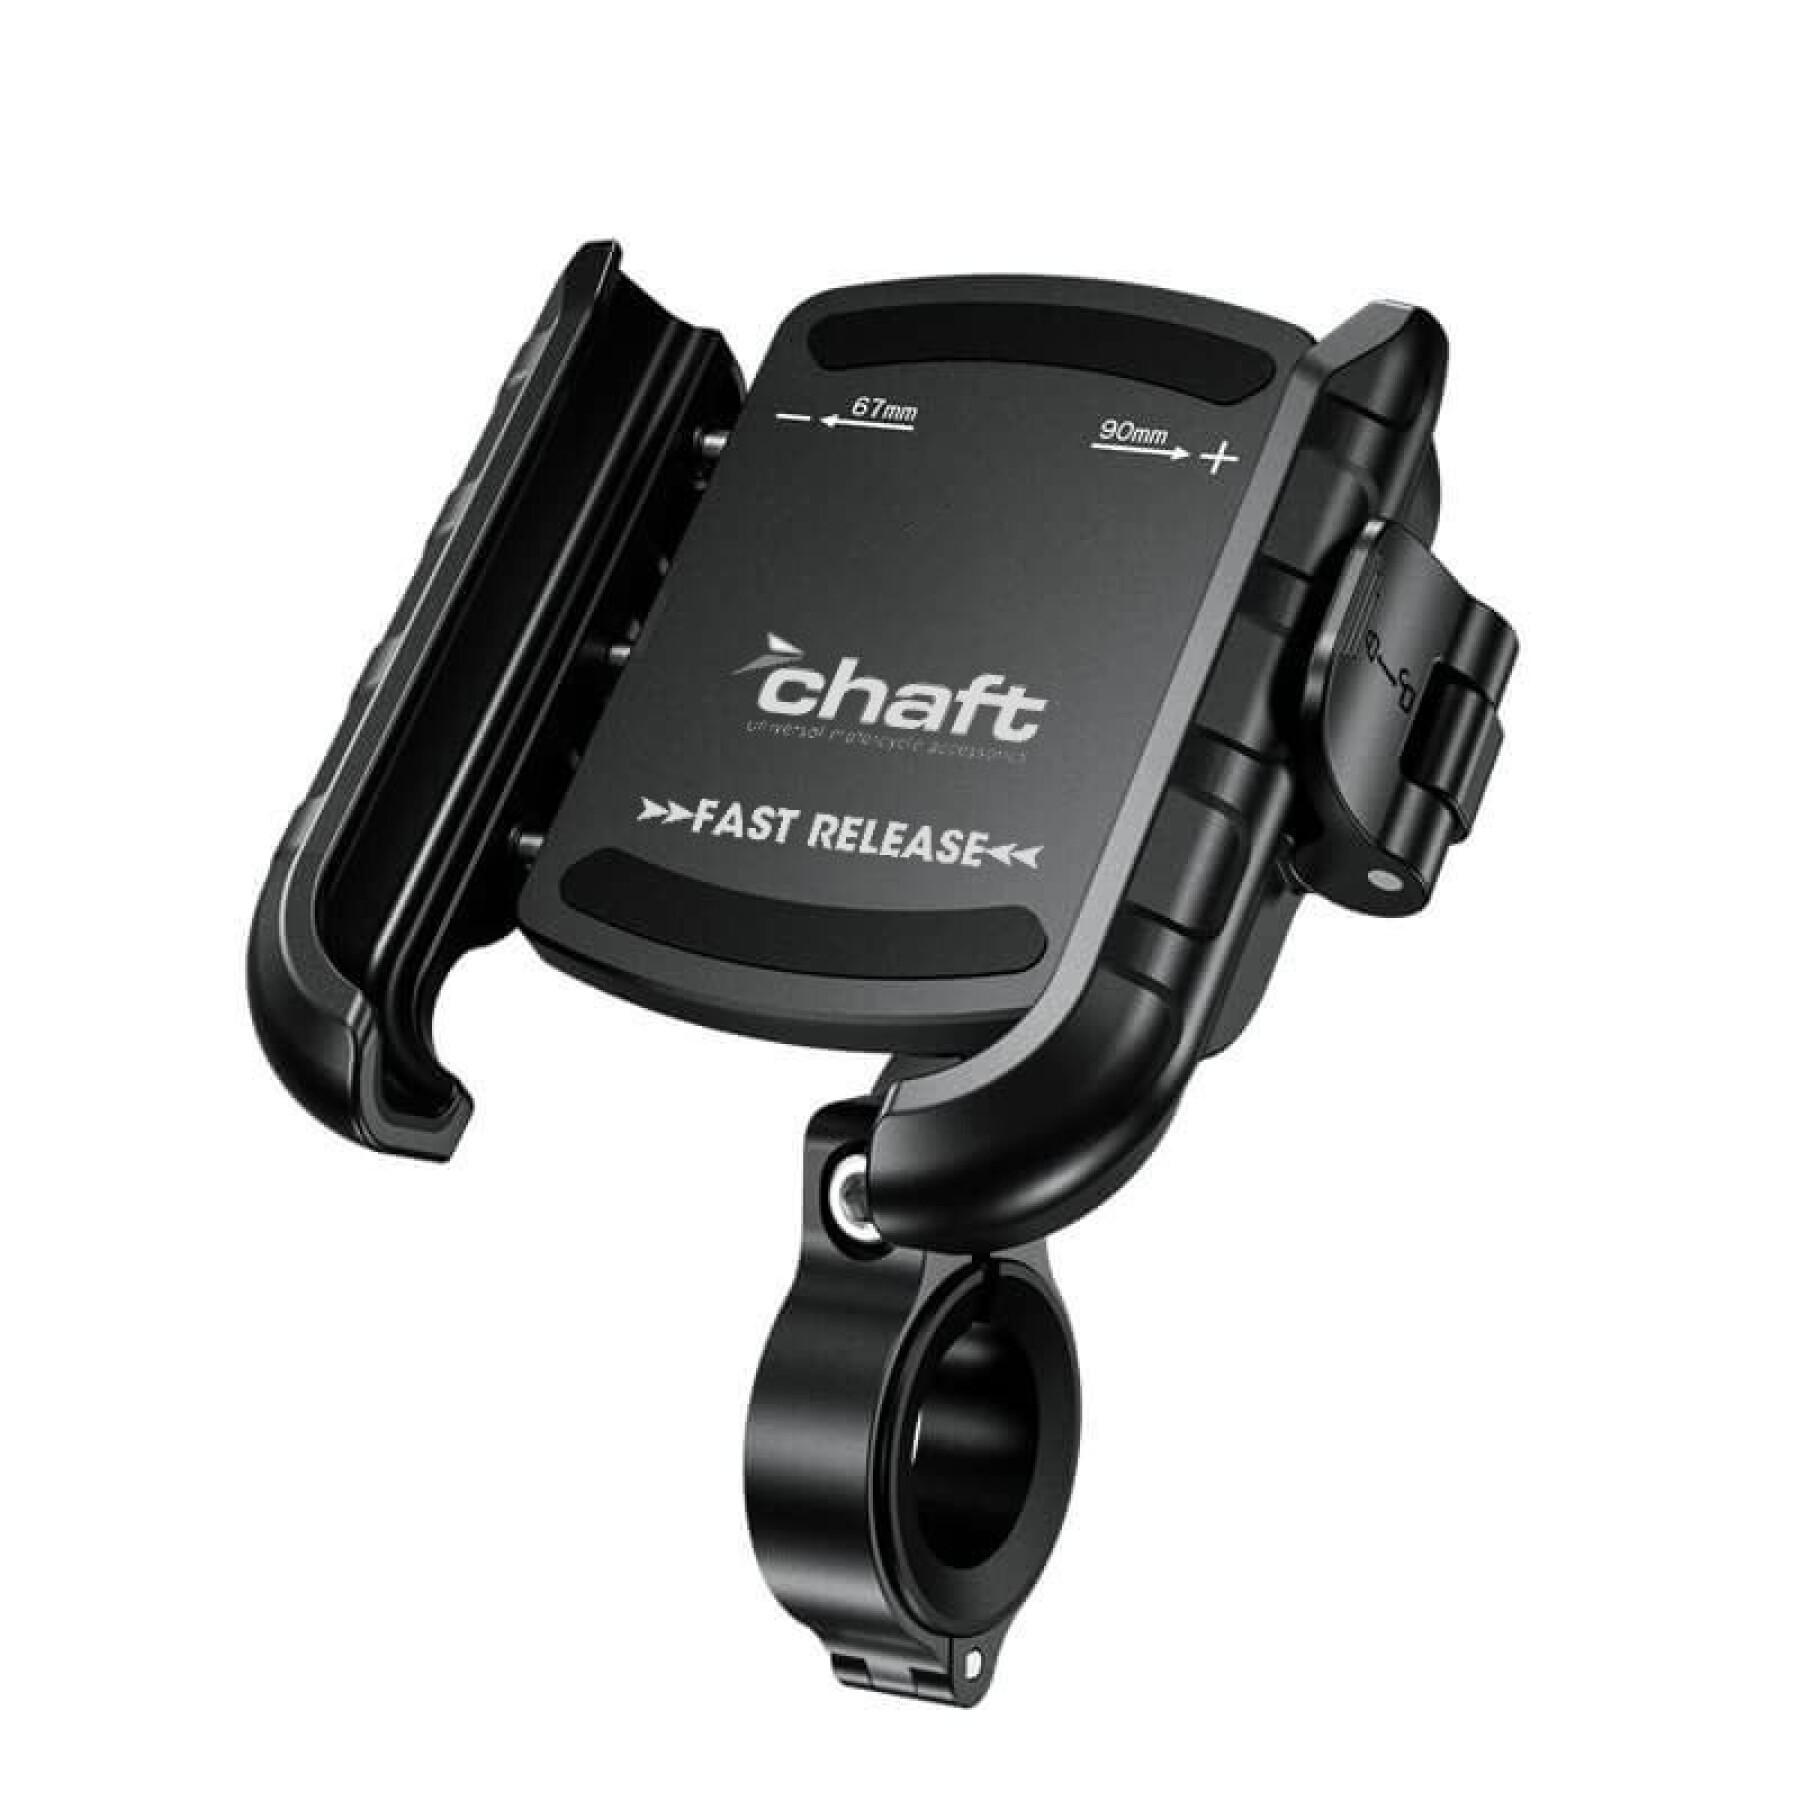 Motorcycle smartphone holder Chaft Fast Release